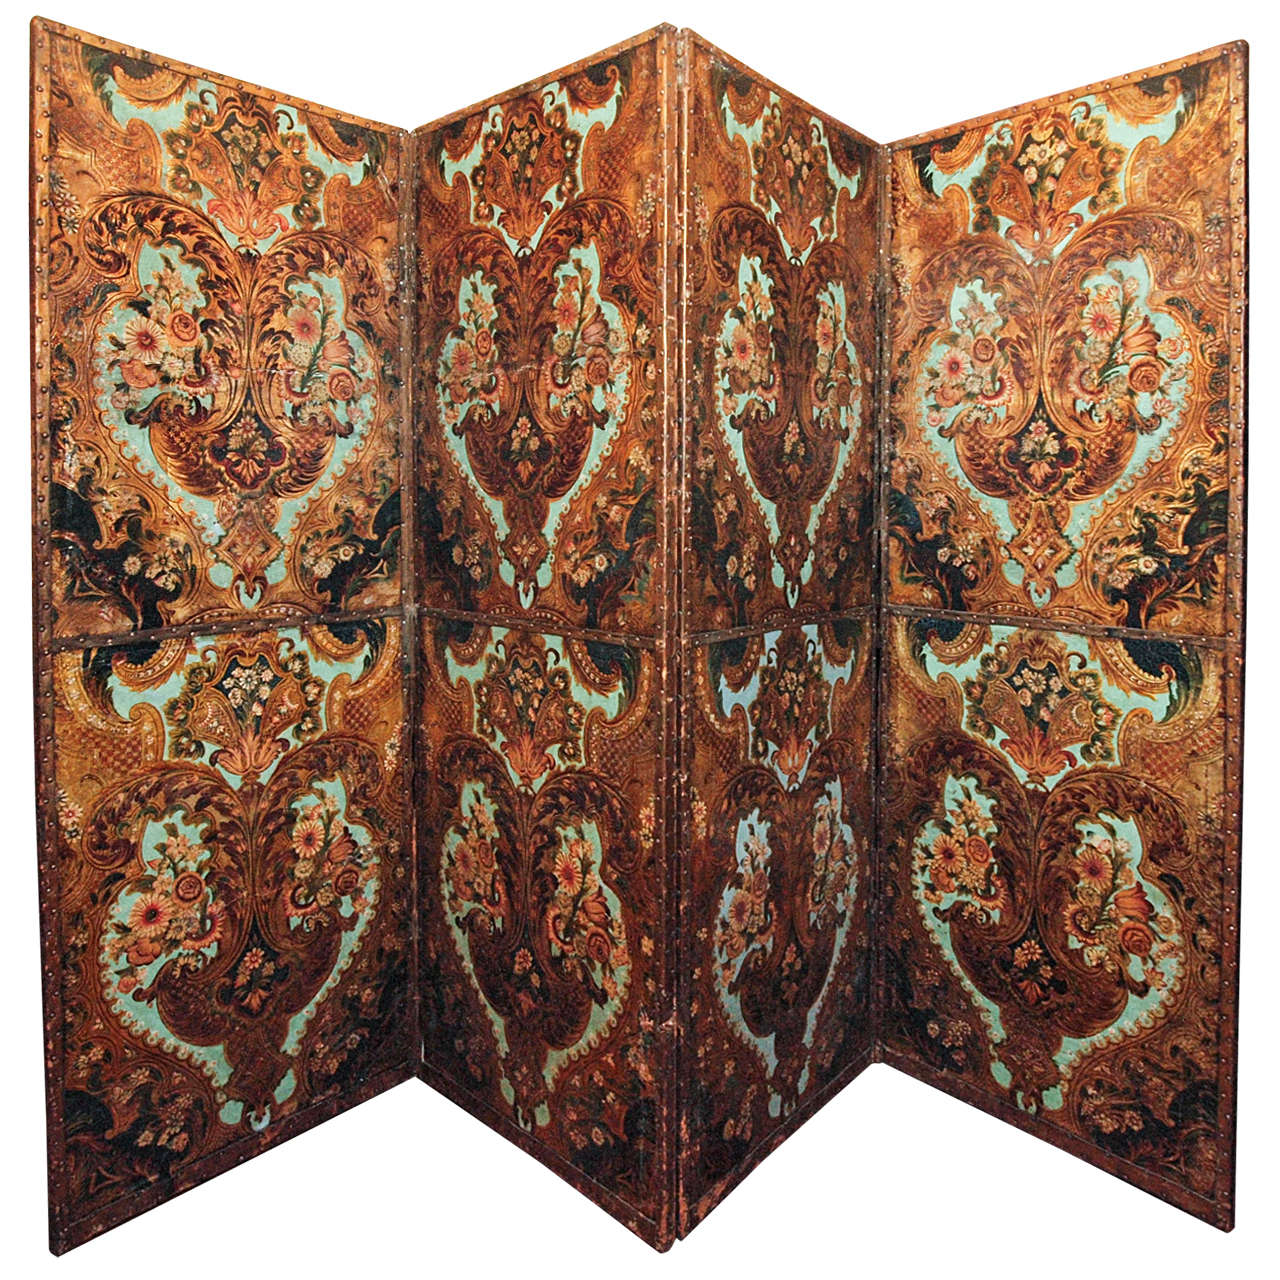 17th Century Spanish Cordovan Polychromed Leather Four Panel Screen